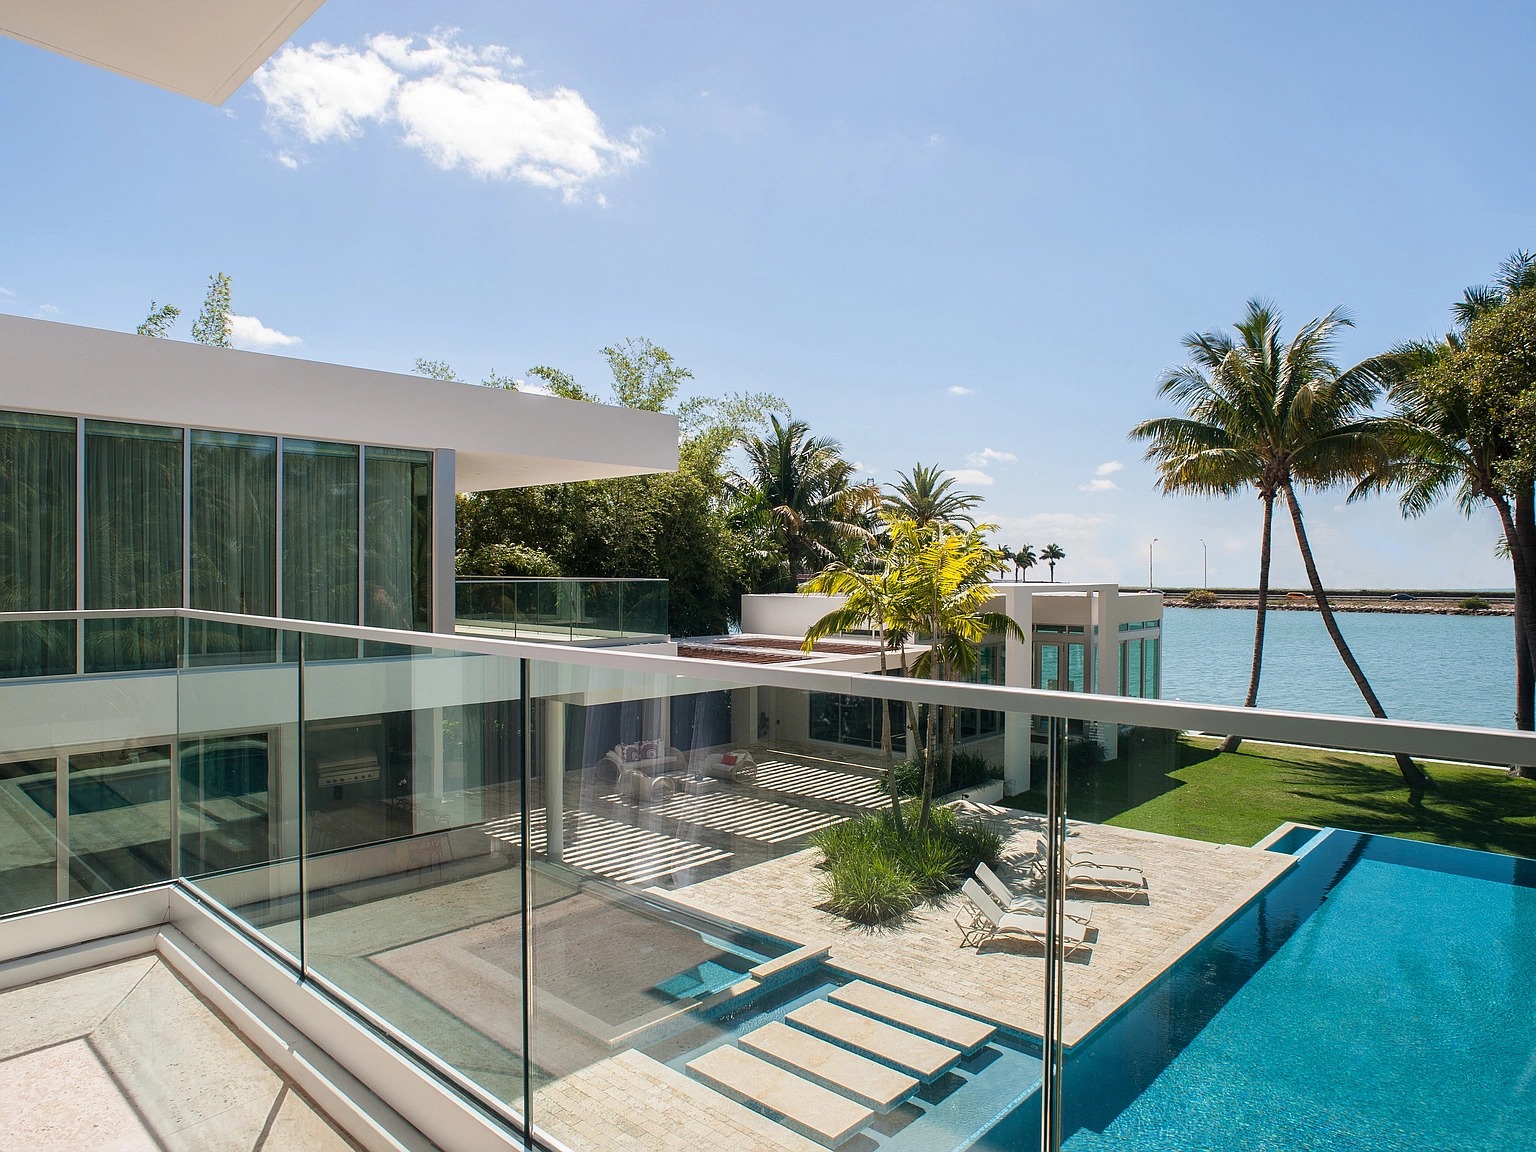 30 Palm Ave, Miami Beach, FL 33139 - $29,000,000 home for sale, house images, photos and pics gallery